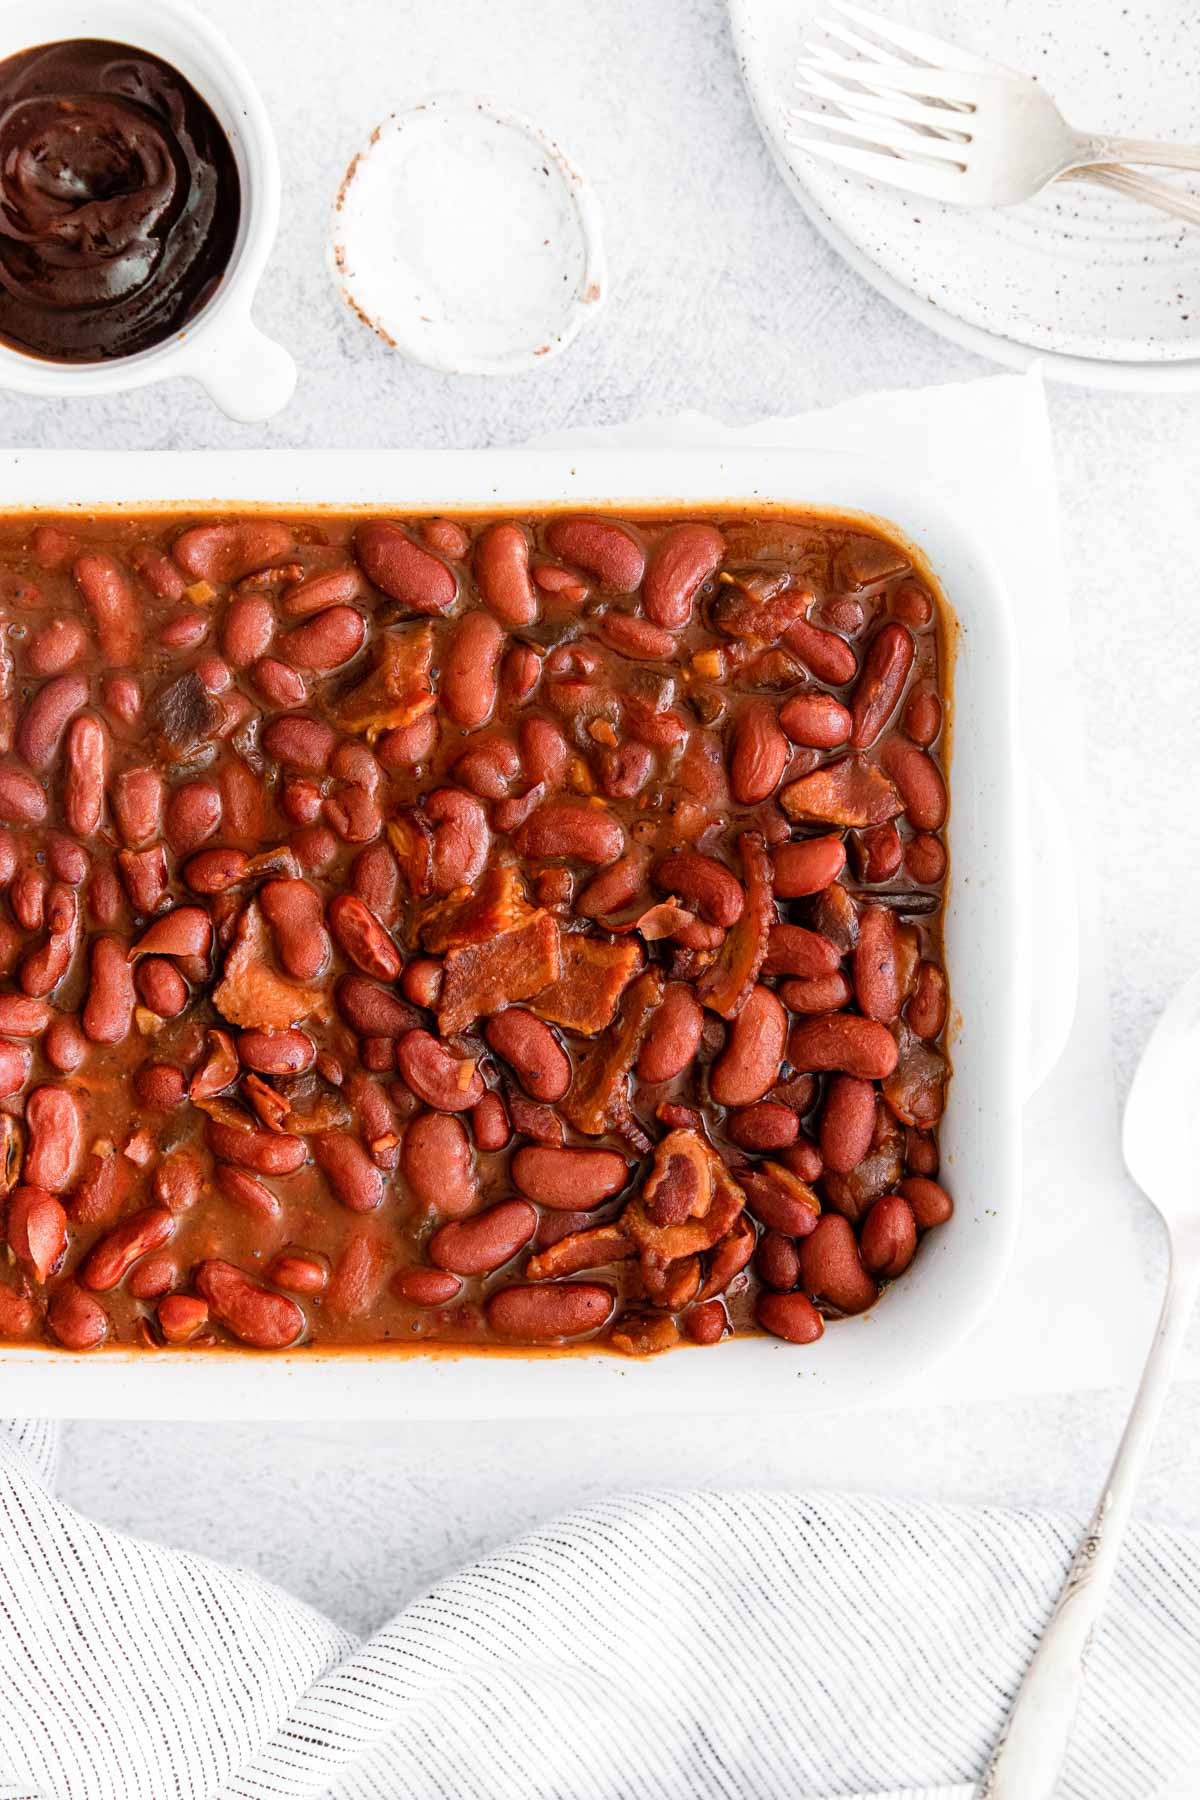 the completed beans recipe on a table